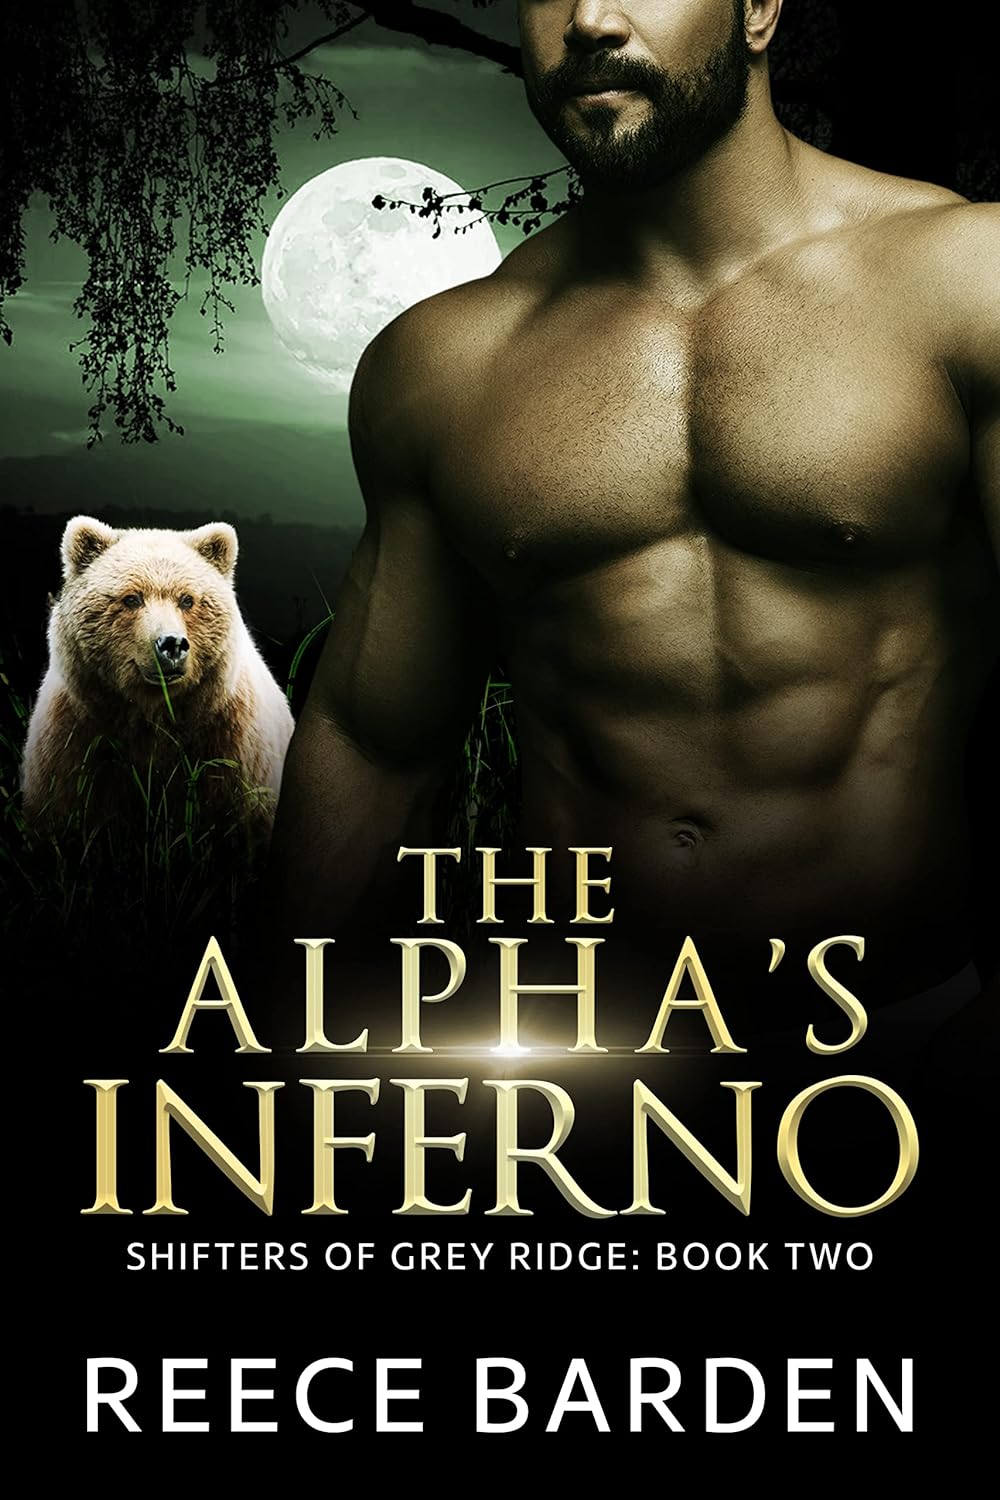 The Alphas Inferno Paranormal Werewolf Romance by Bestselling Author Reece Barden